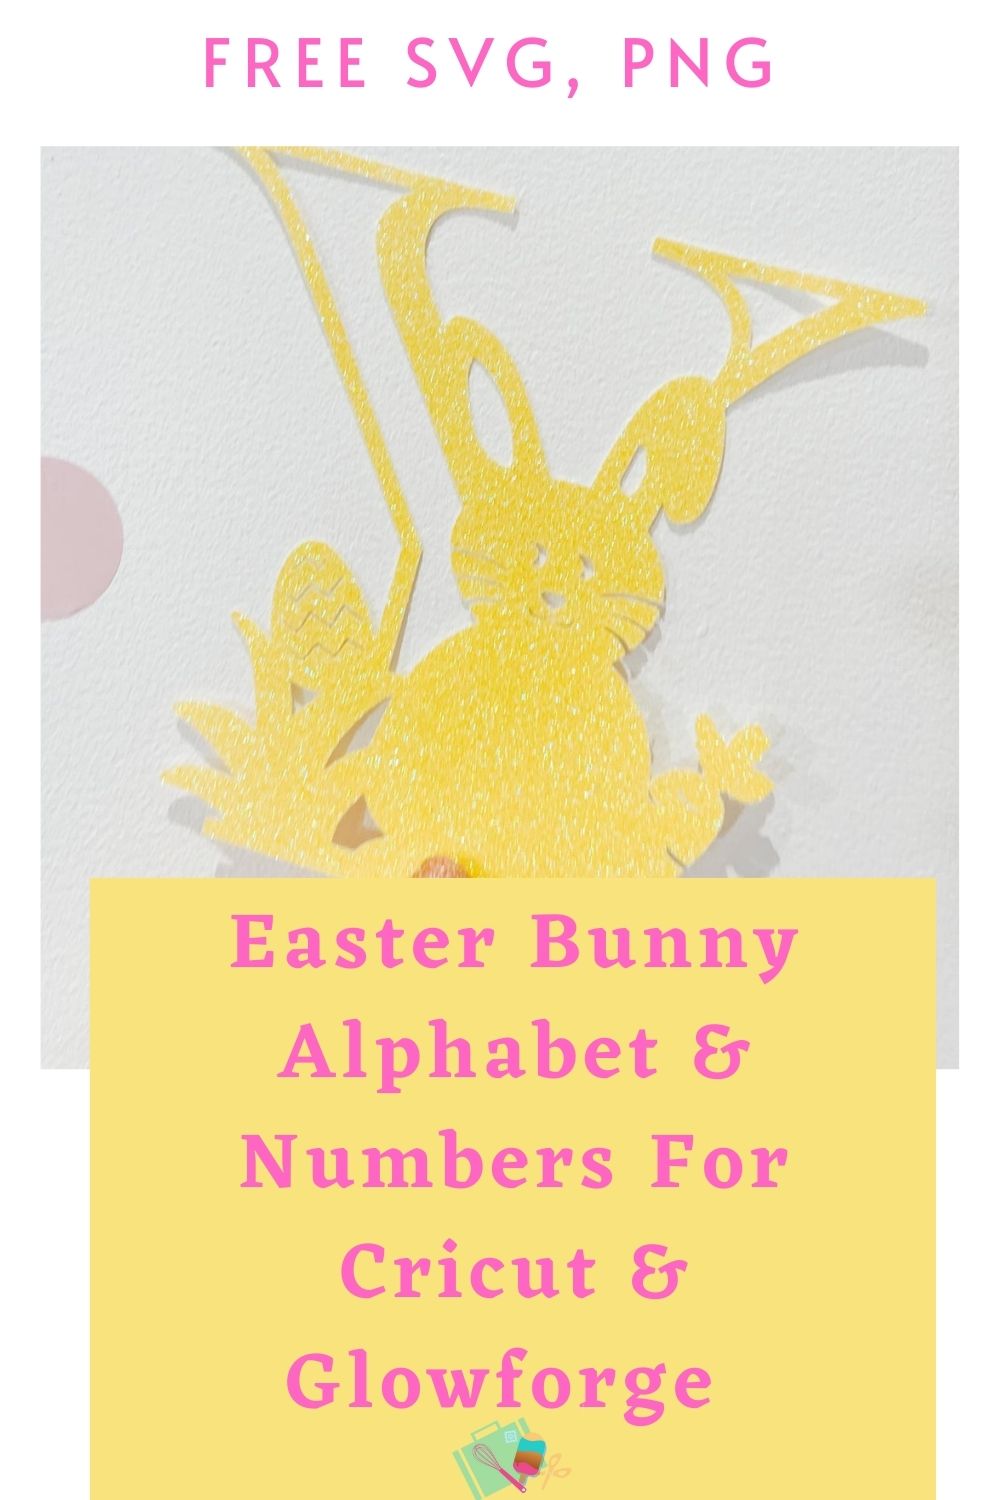 Free Easter Bunny Alphabet for Cricut and Glowforge Free SVG, PNG